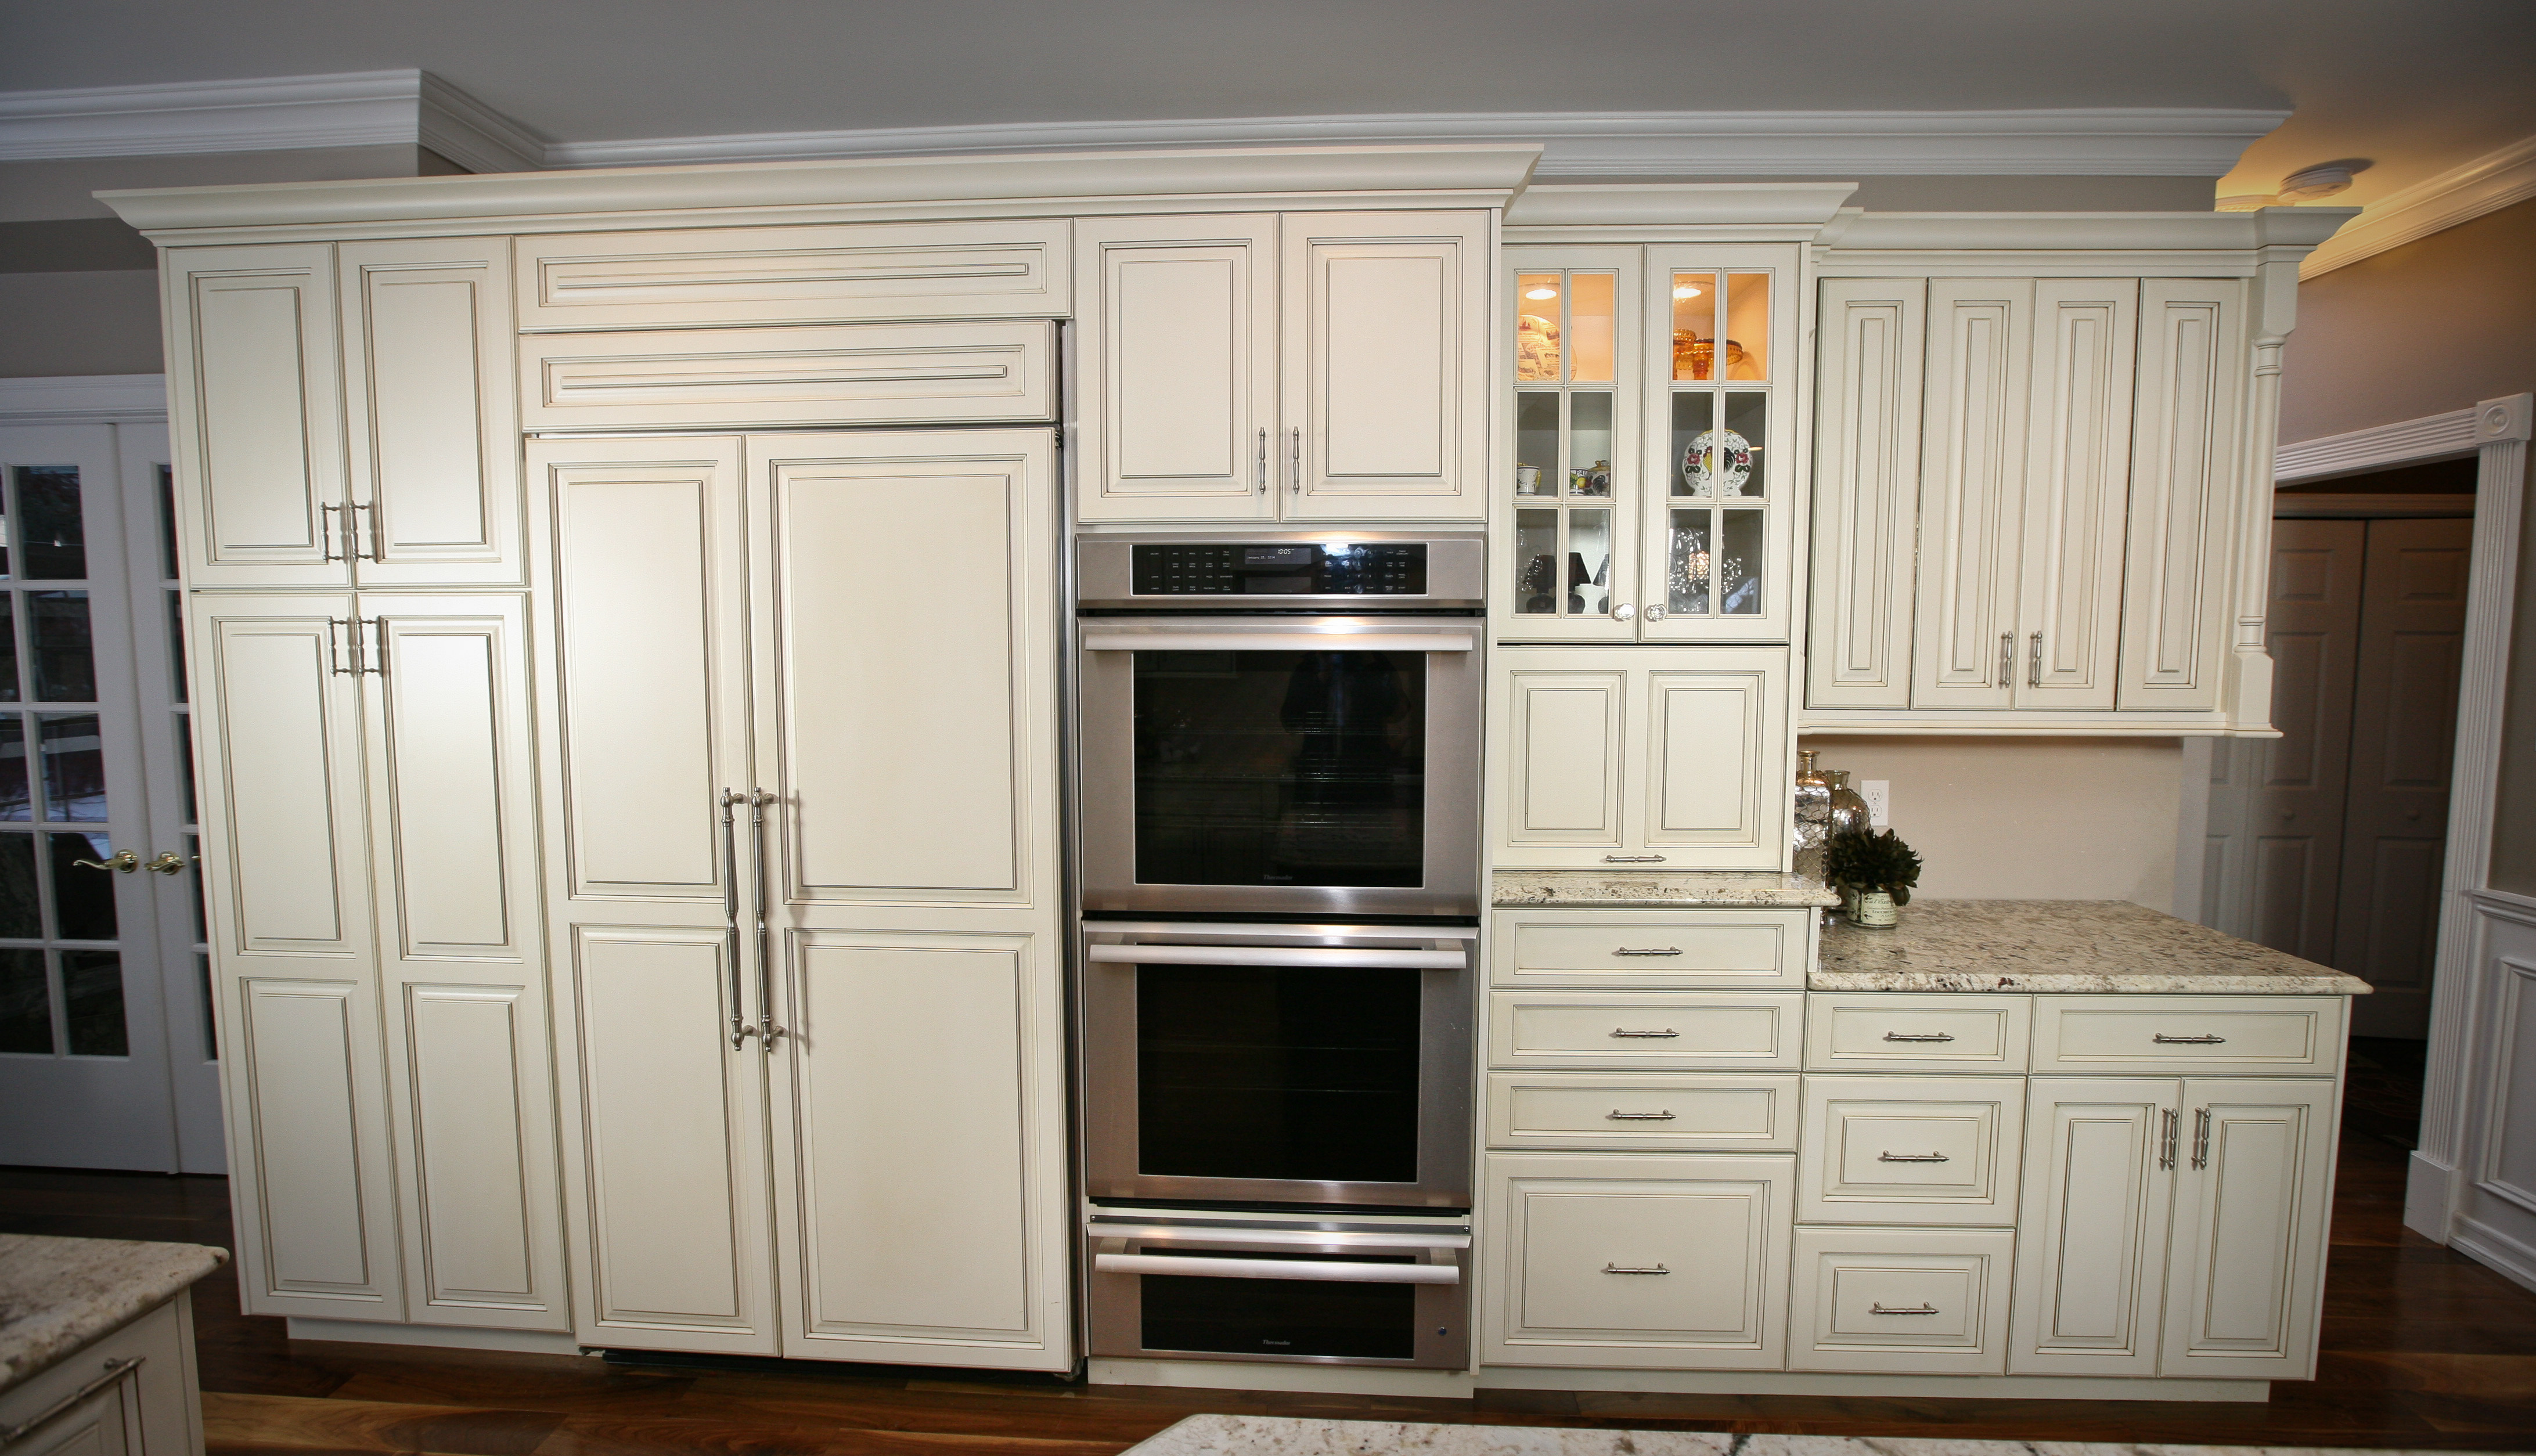 Perfect Balance Kitchen Wall New Jersey By Design Line Kitchens